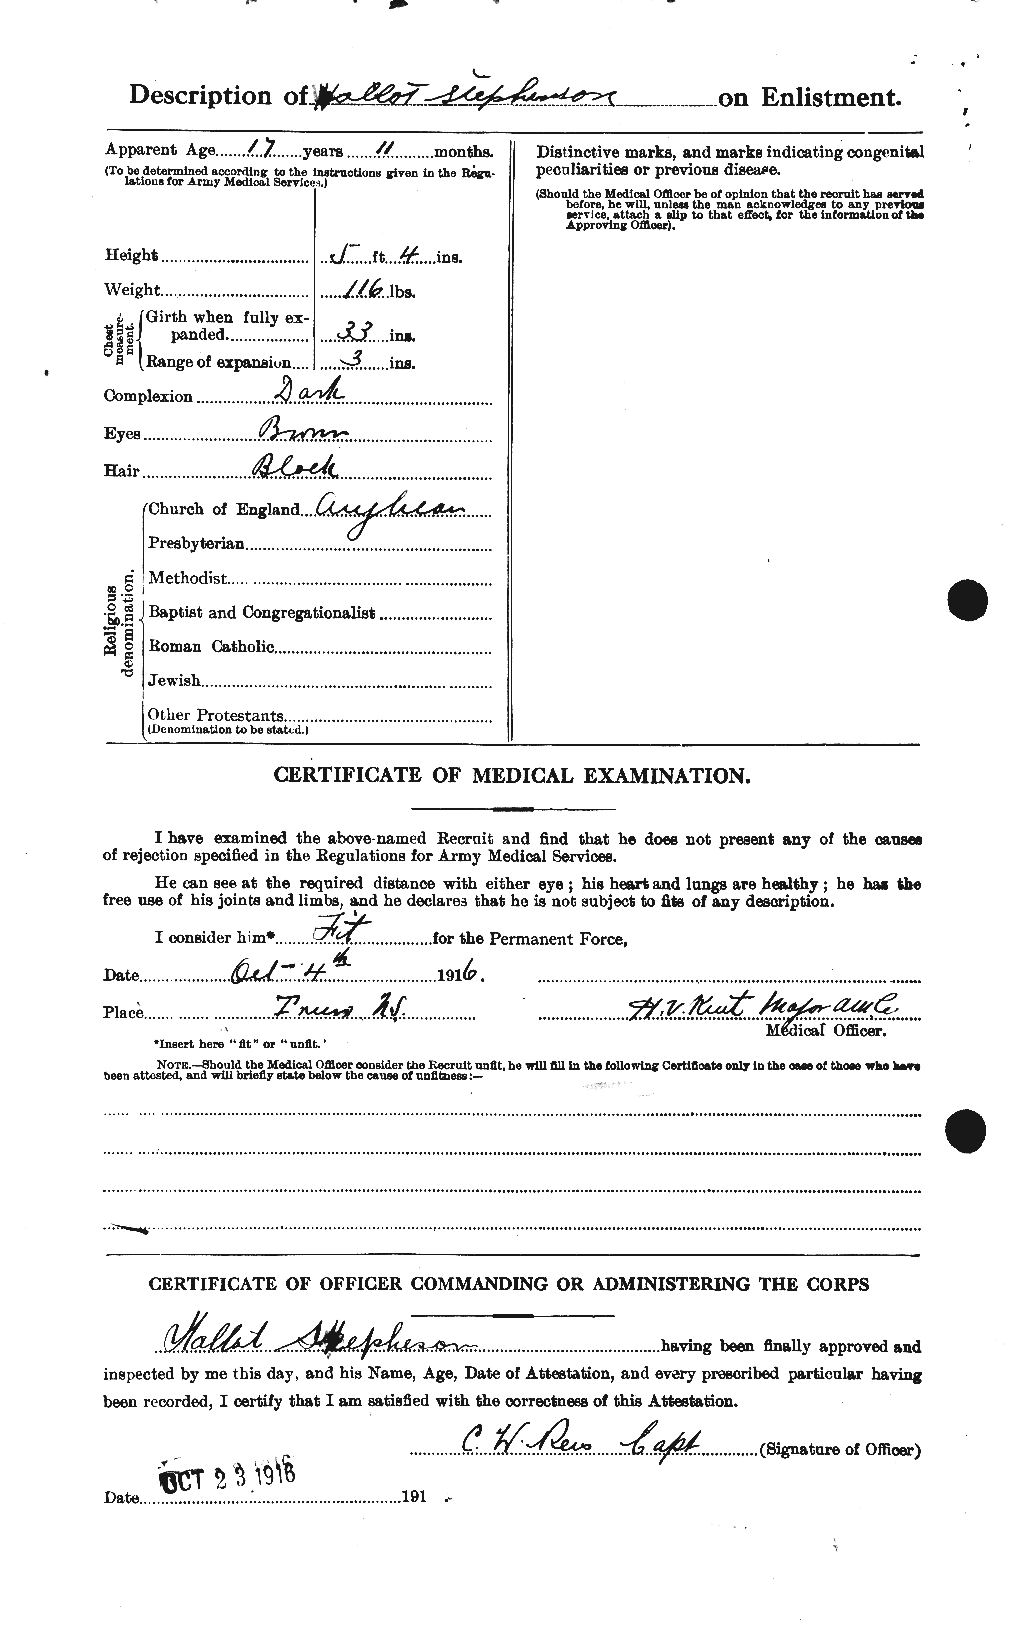 Personnel Records of the First World War - CEF 117216b